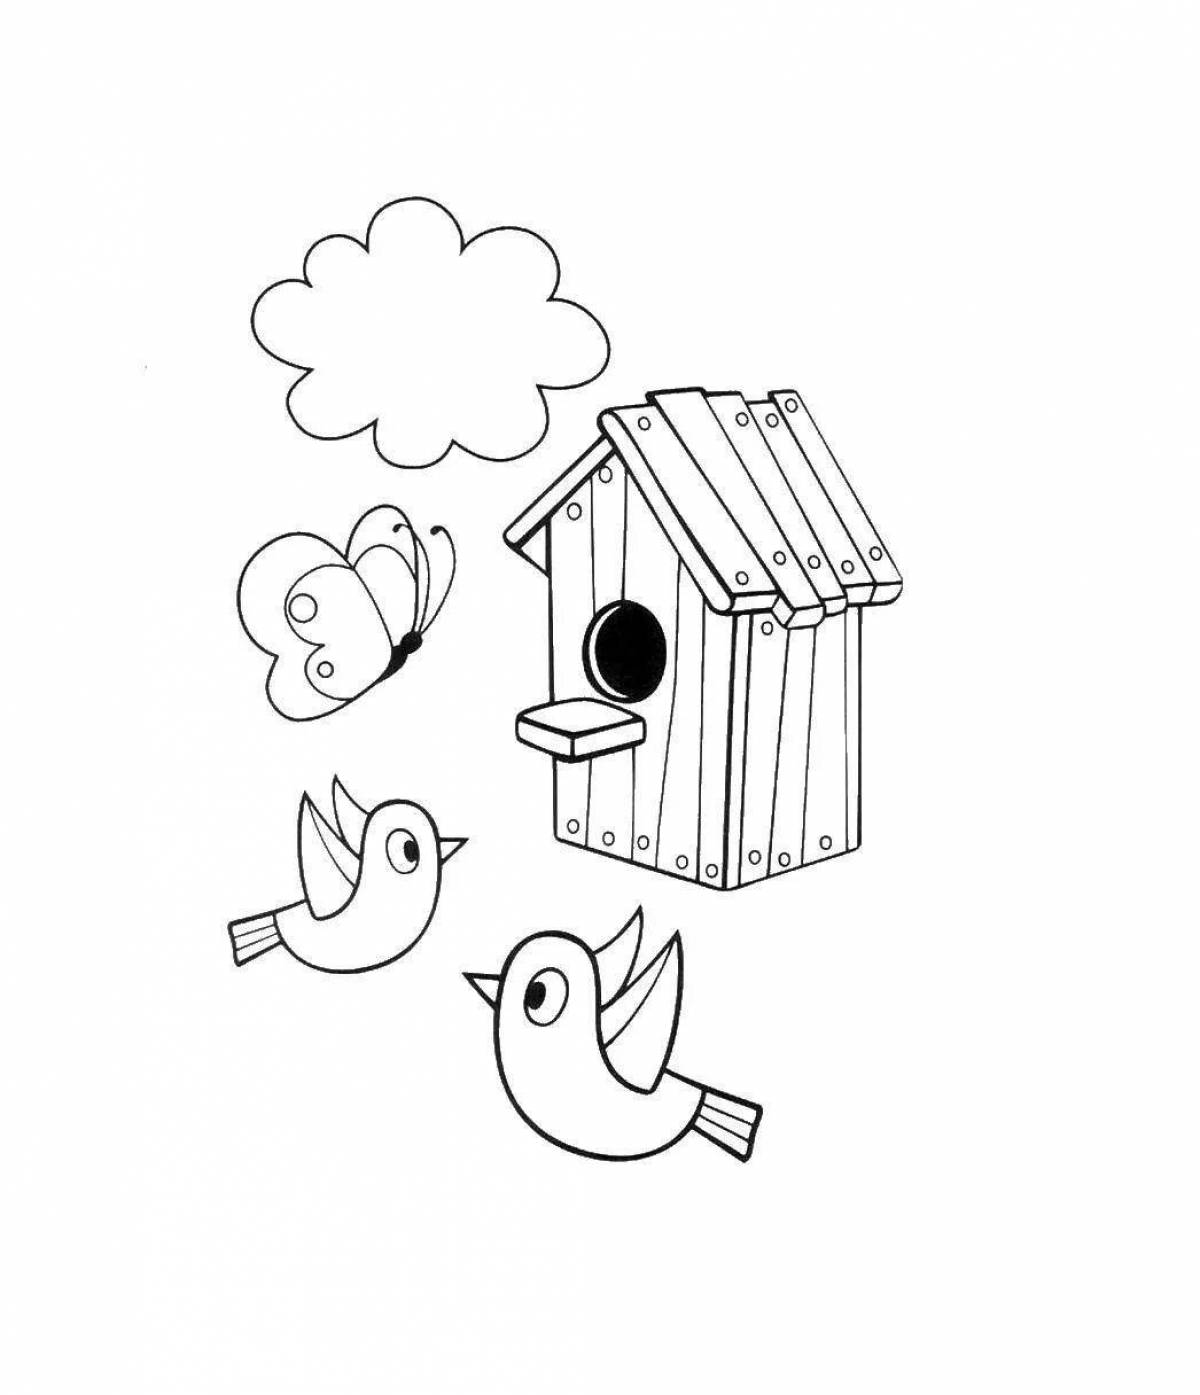 Great birdhouse coloring book for kids 3-4 years old